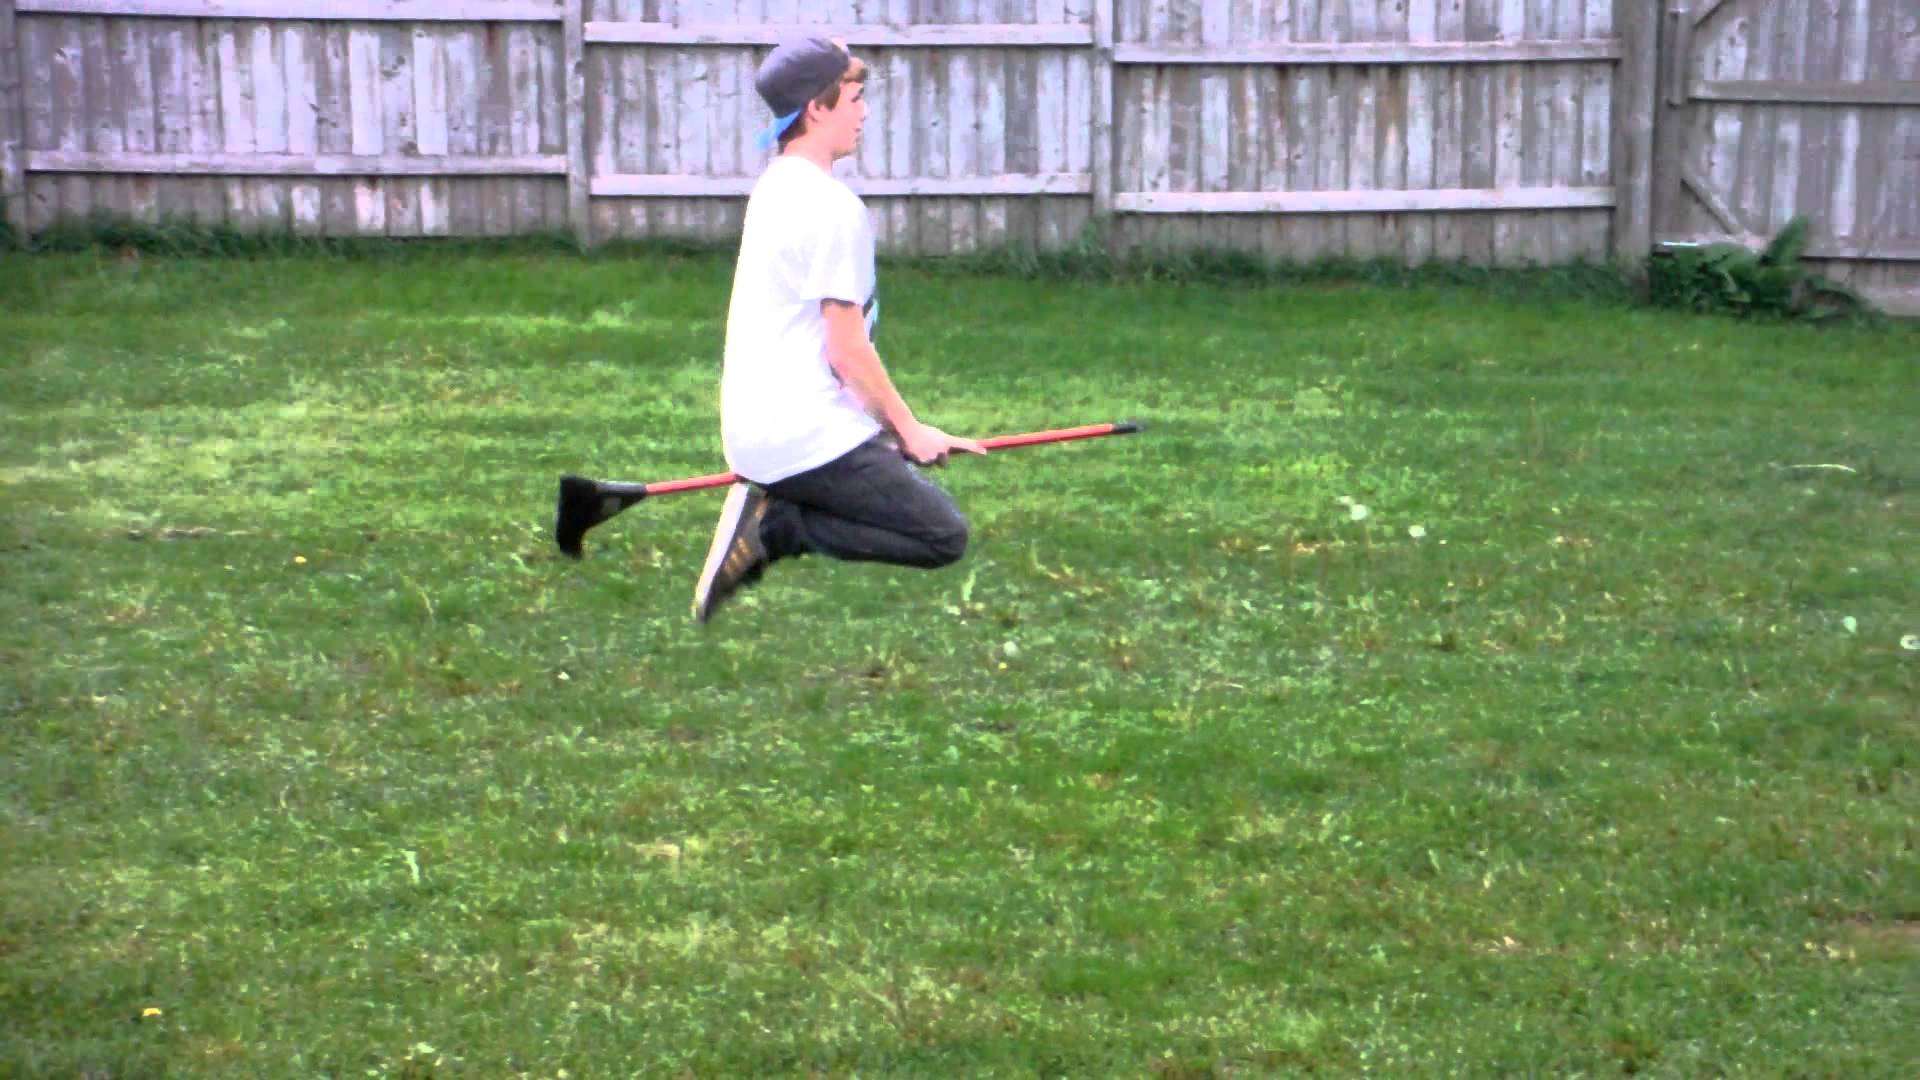 I Don't Even Know, A Hilarious Stop-Motion Video of a Guy Flying on a  Broomstick Making Funny Noises